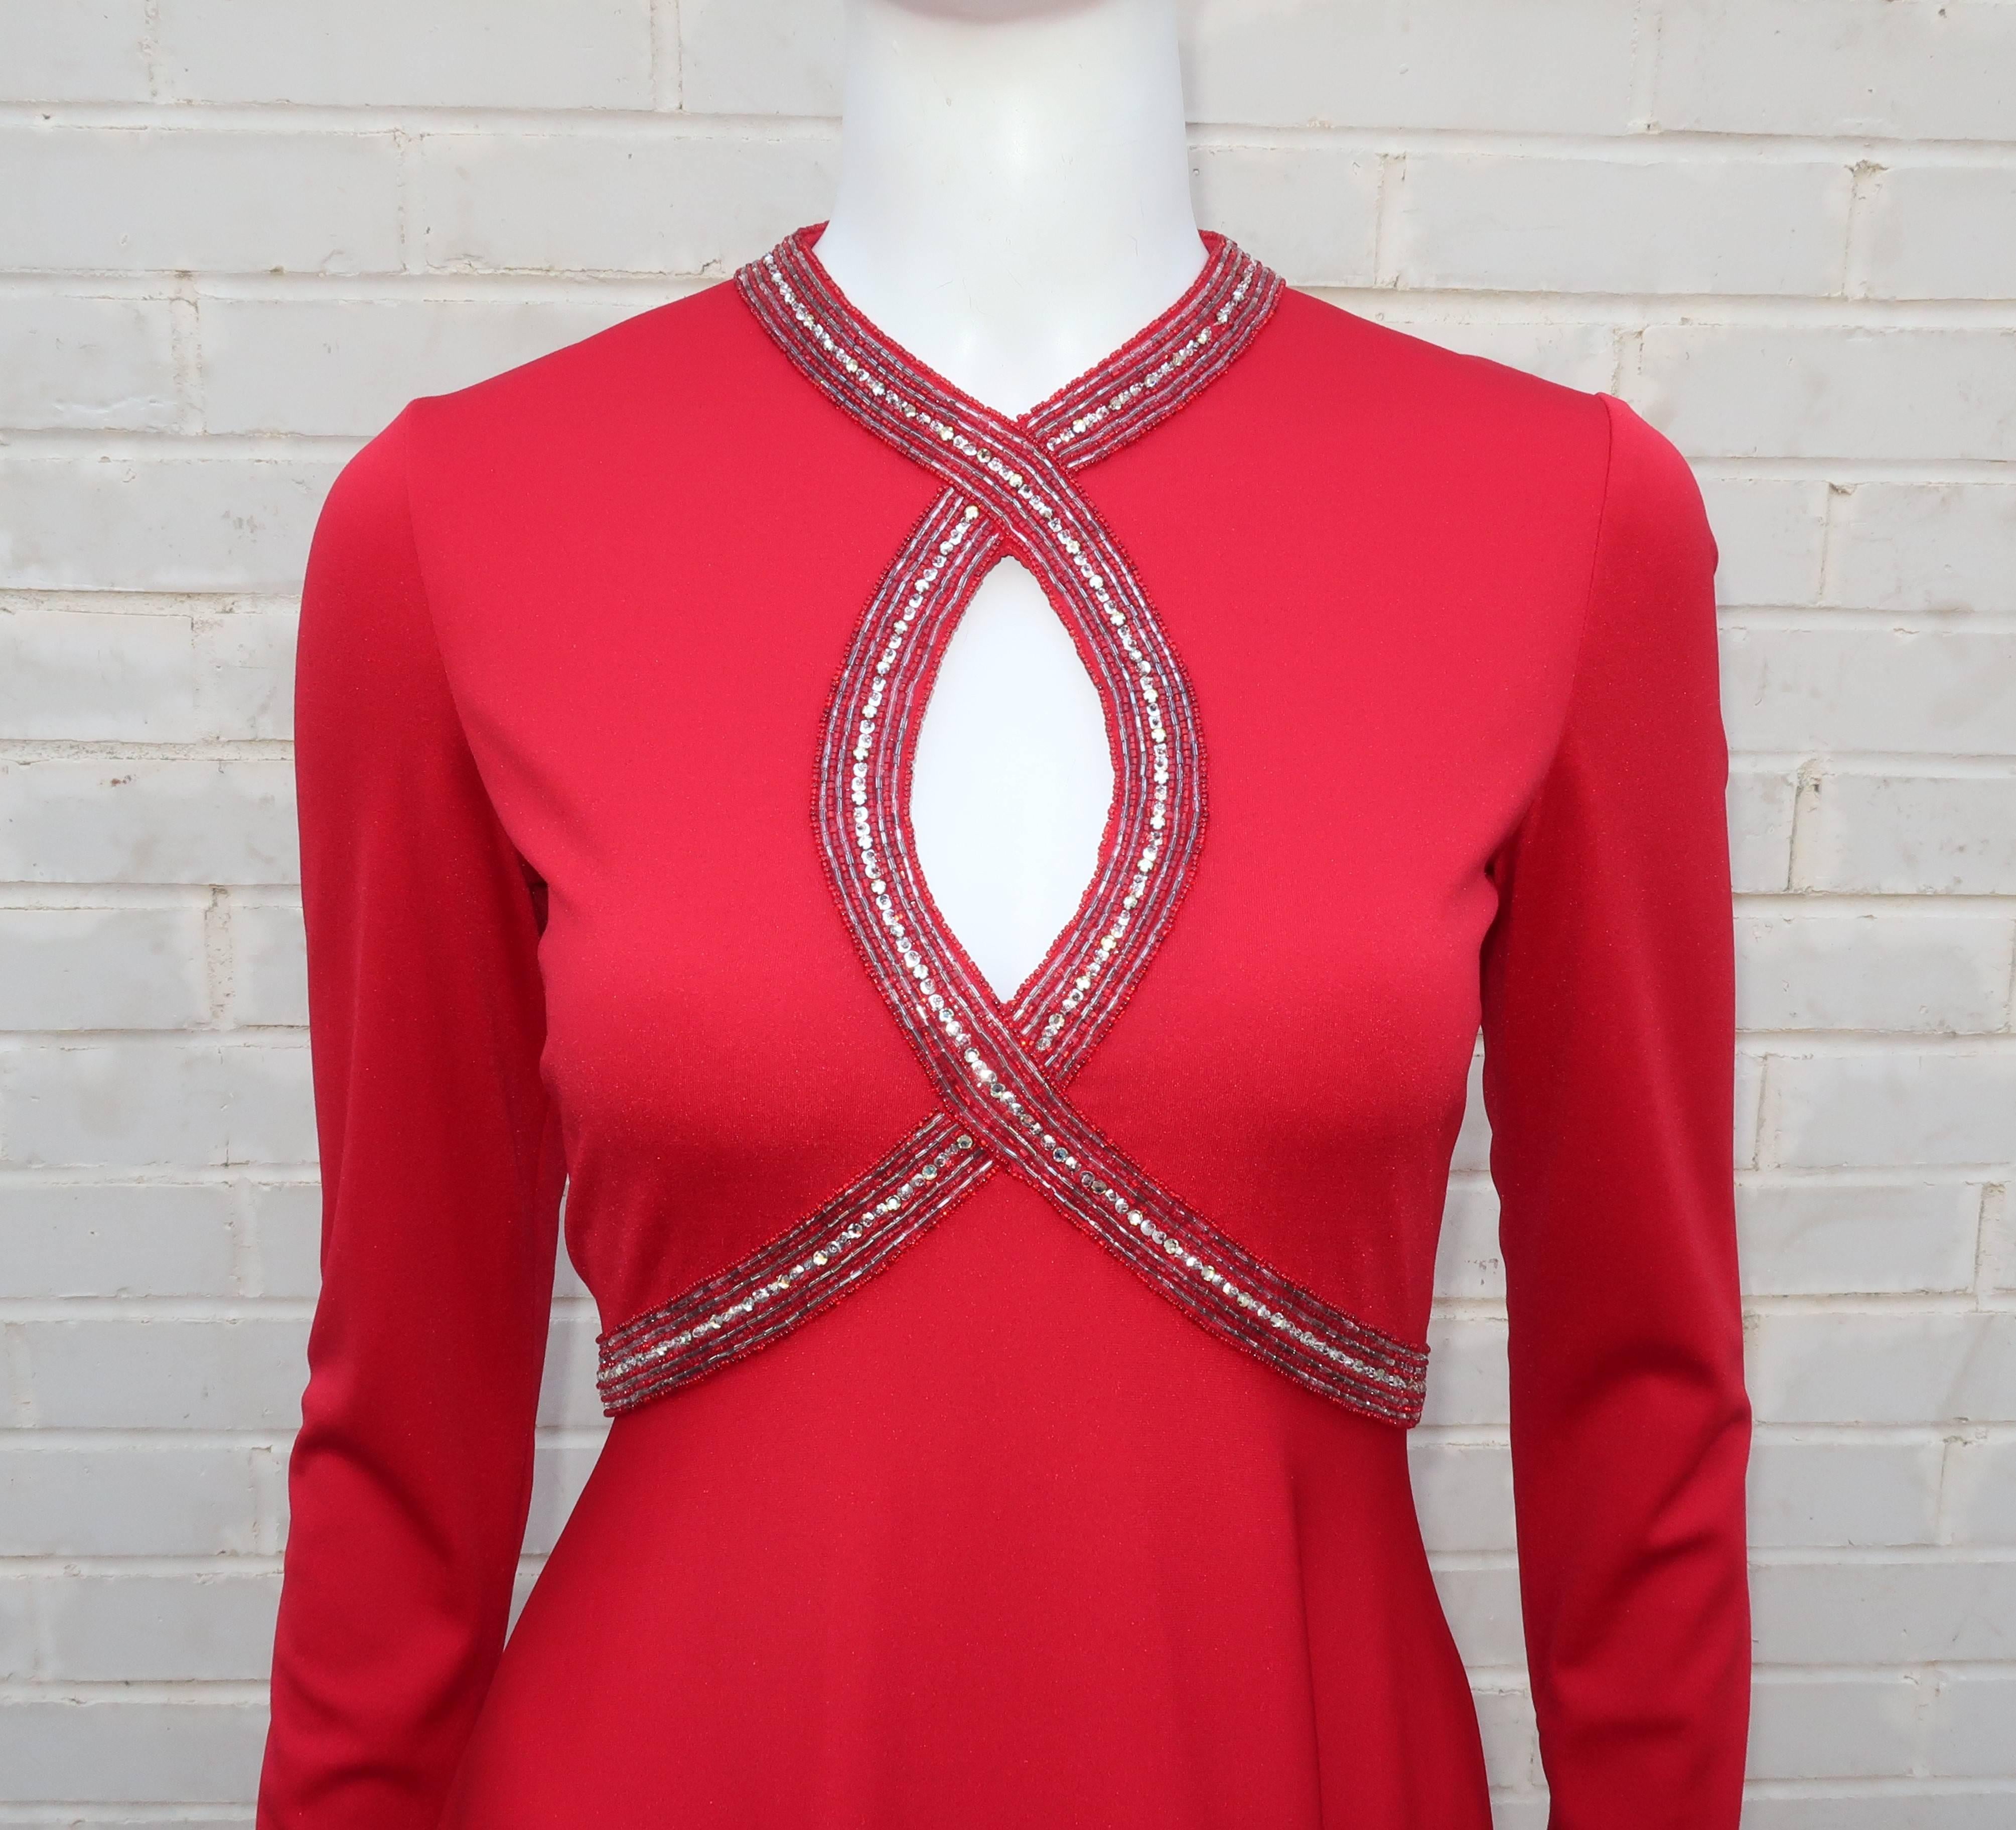 Cut a slinky, yet elegant, silhouette with this C.1970 Victoria Royal evening dress.  The bright lipstick red jersey sports a flattering a-line skirt topped by a fitted bodice embellished with a beaded, sequined and rhinestone peek-a-boo neckline. 